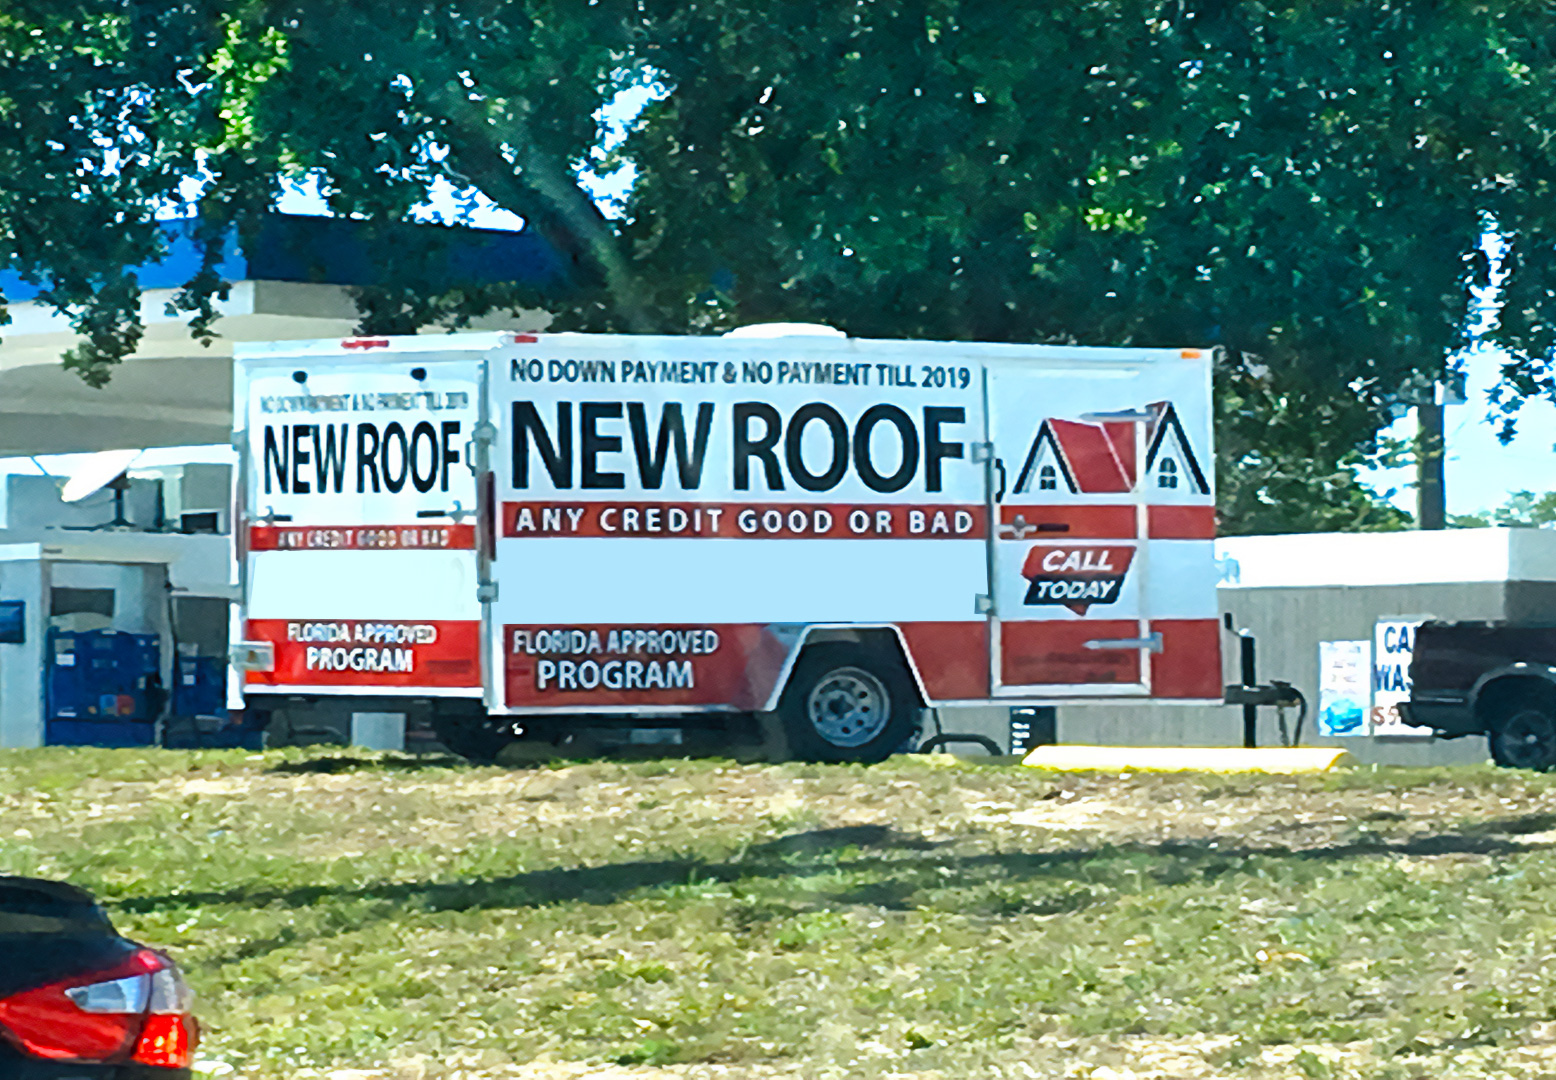 Free Roof Repair Advertisement on a trailer